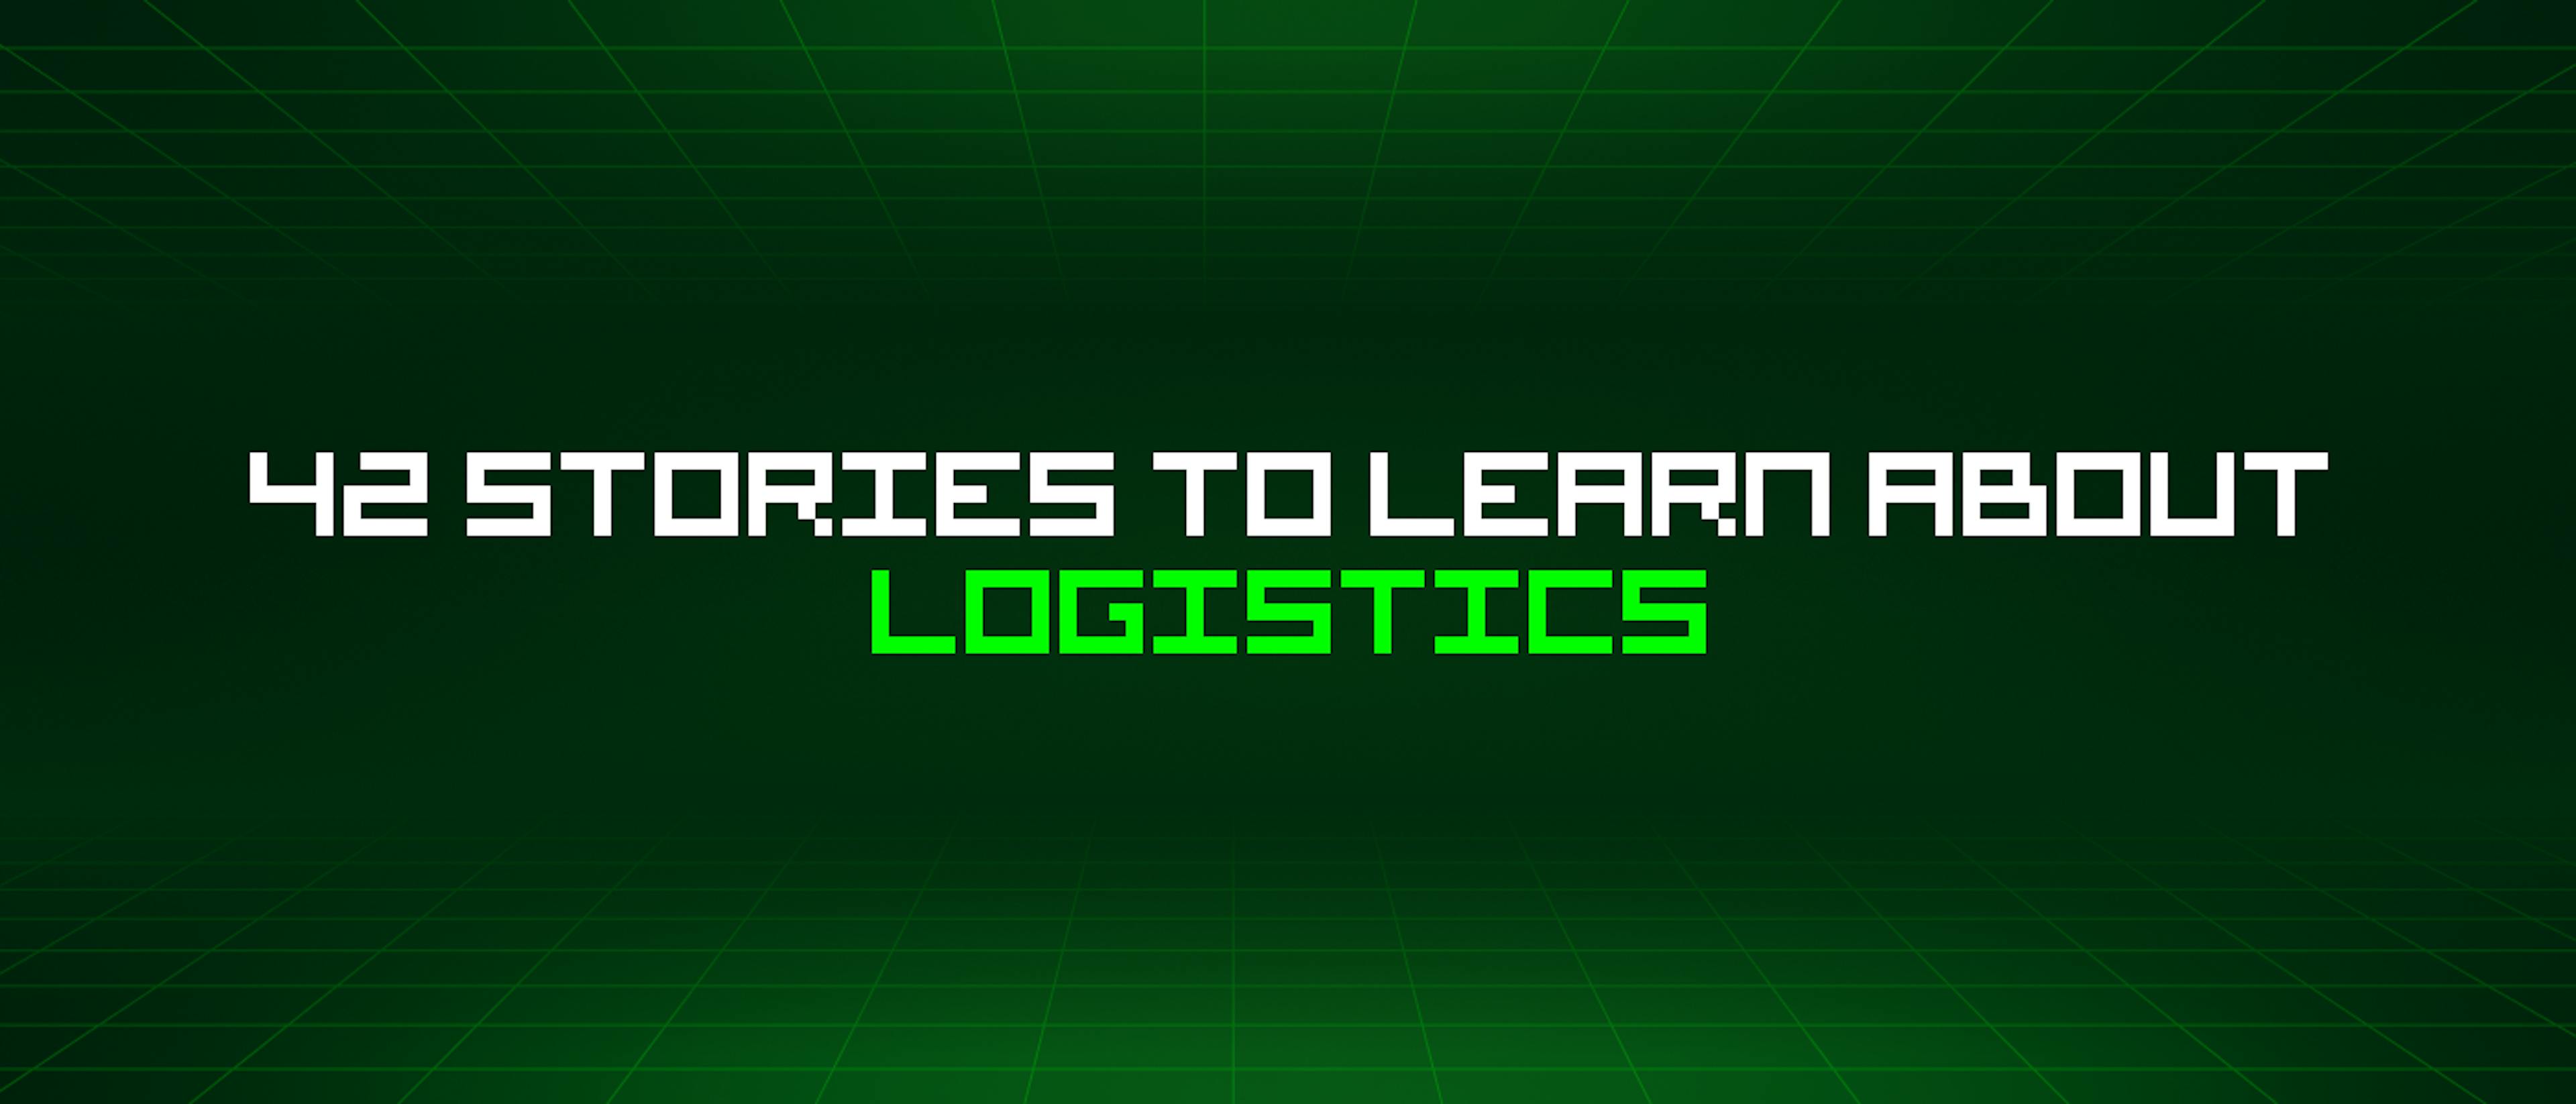 featured image - 42 Stories To Learn About Logistics